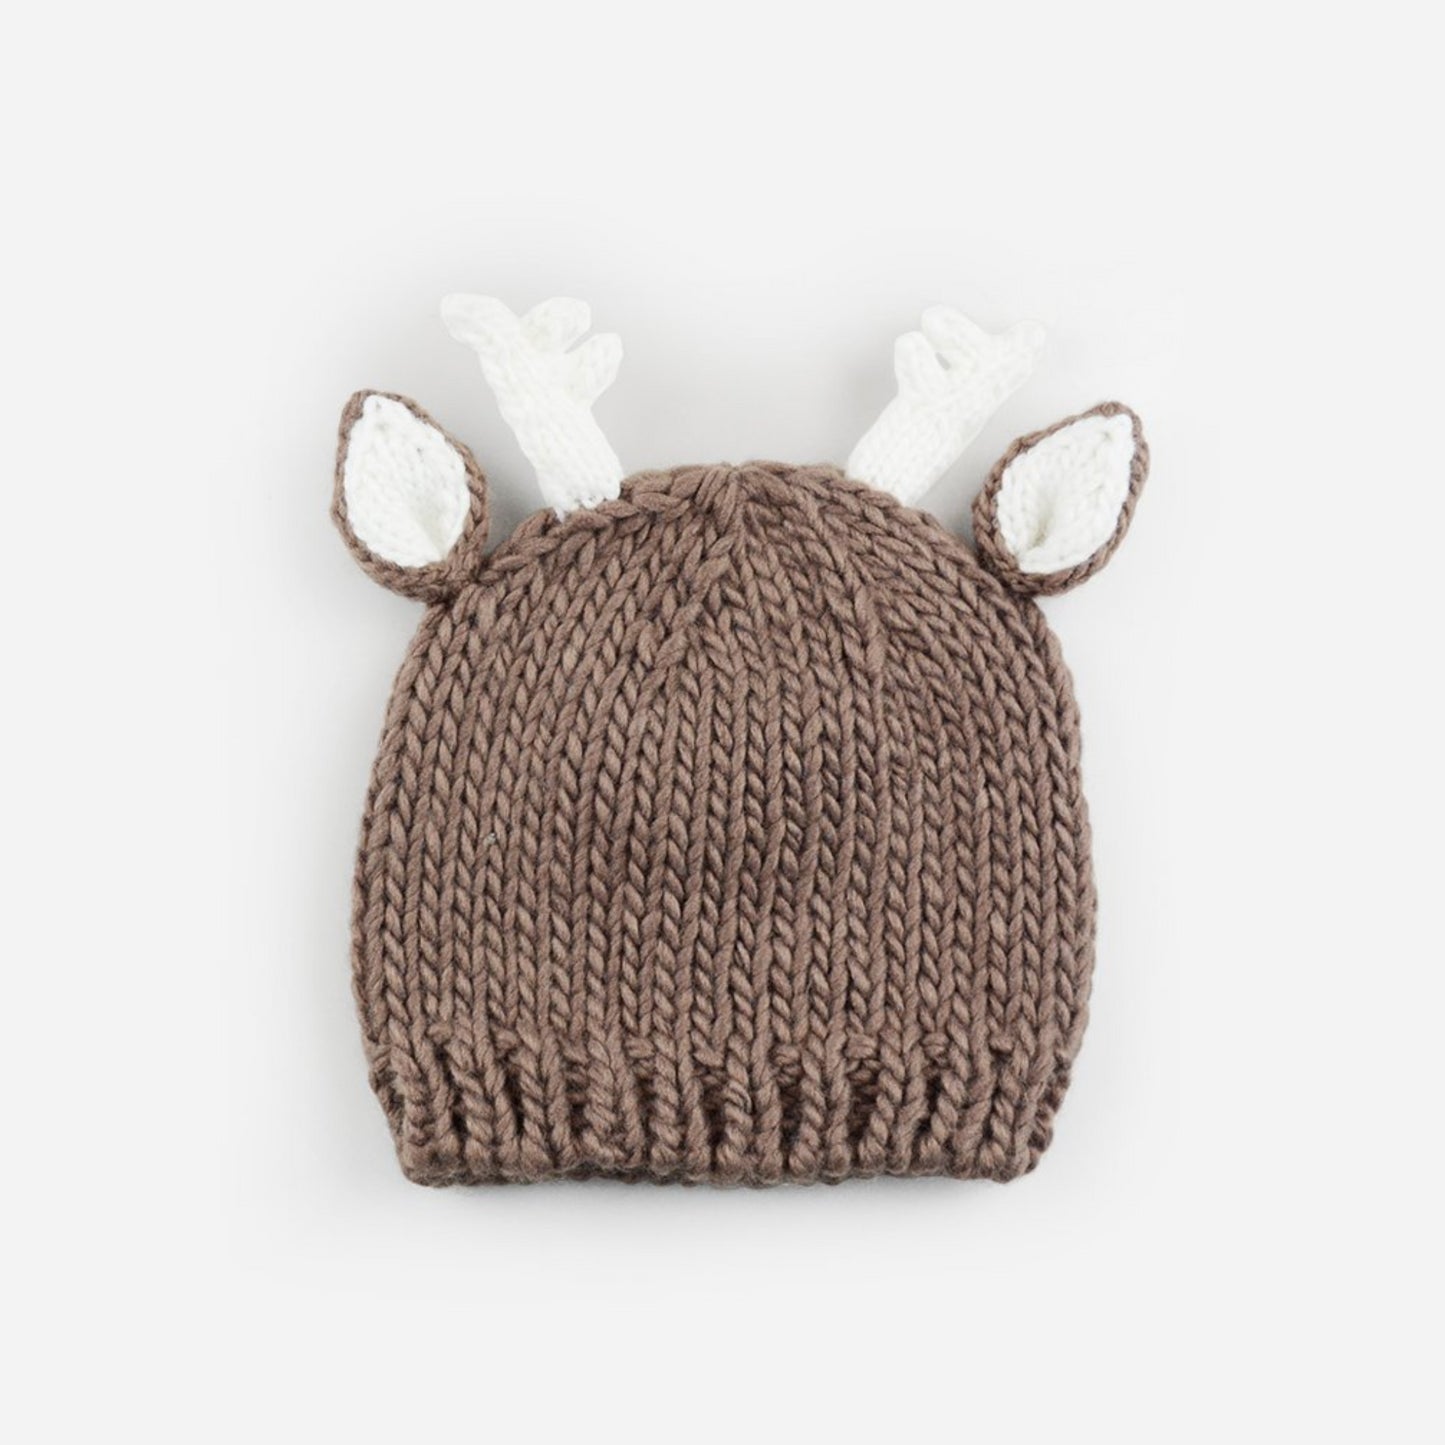 hand knit tan deer hat with white ears and white antlers for baby infant toddler child christmas winter holiday